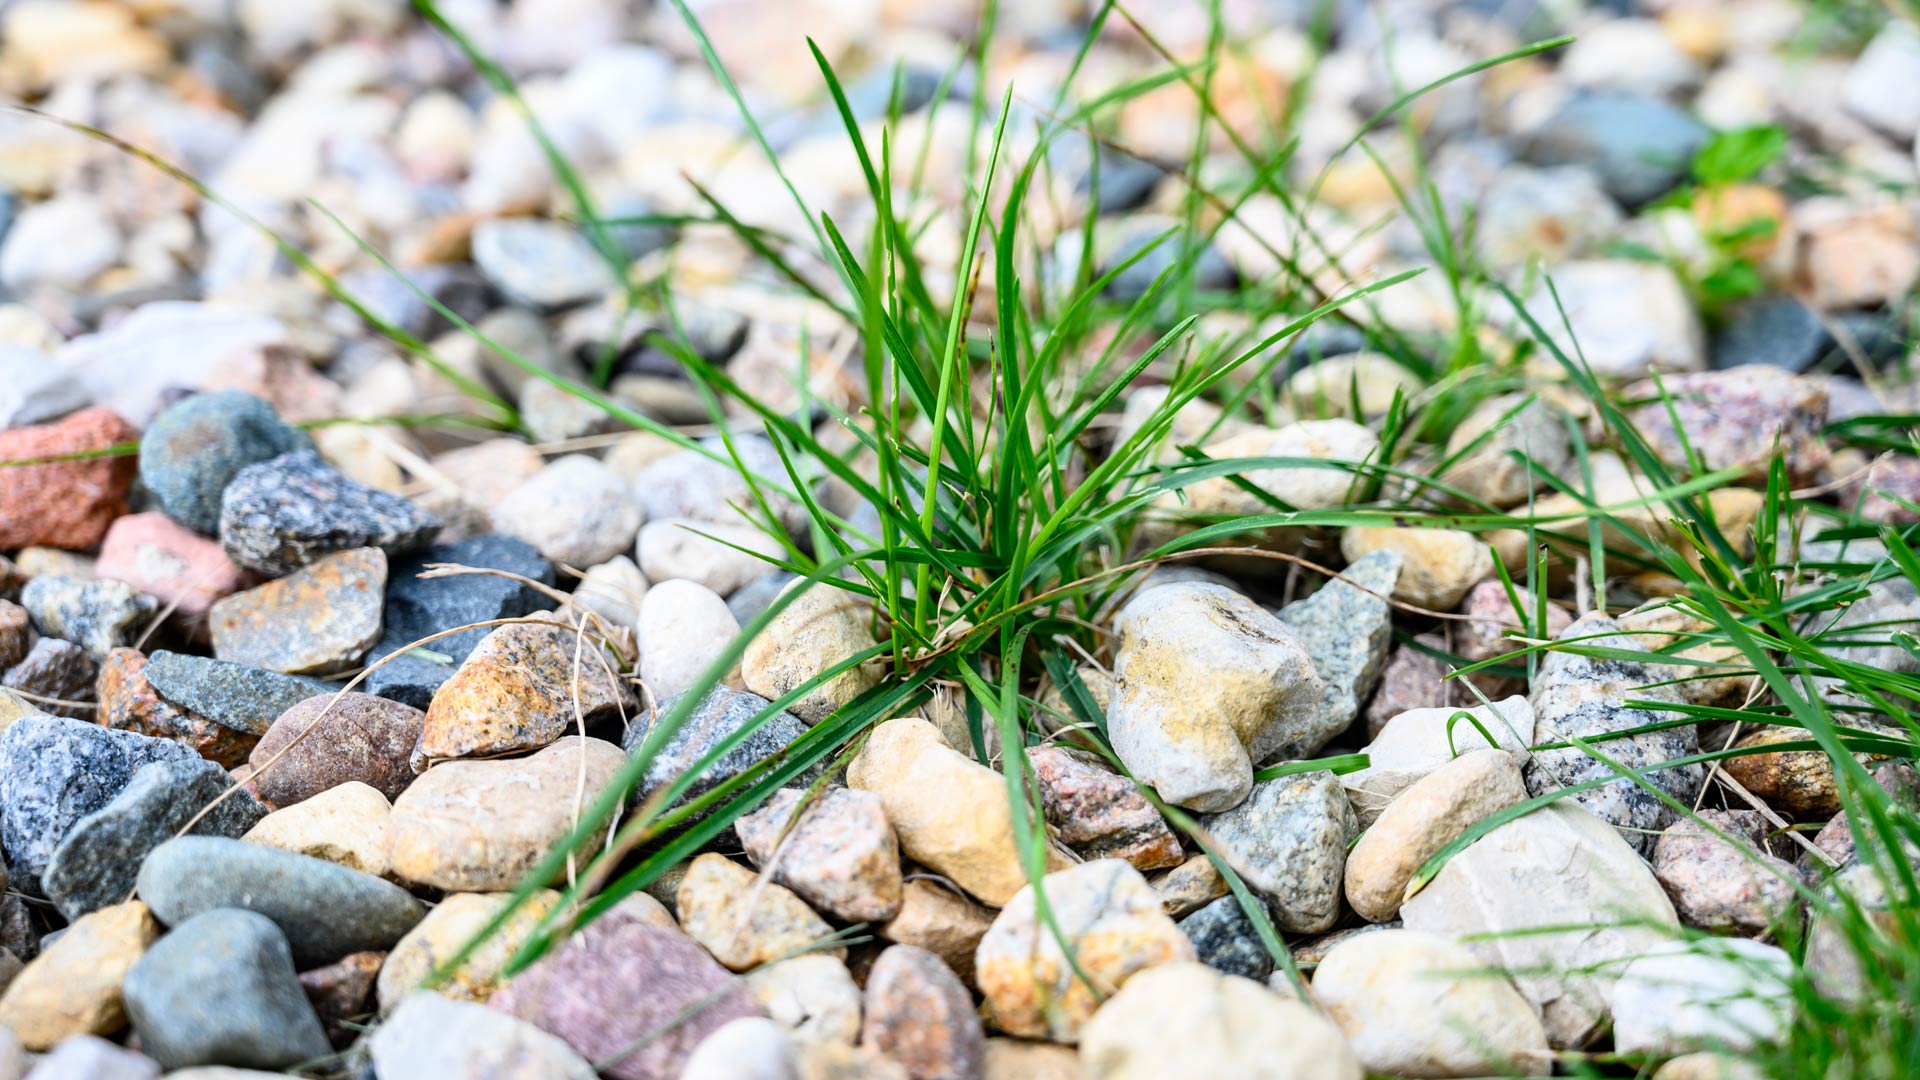 Here’s Why It’s So Important to Keep Your Landscape Beds Free of Weeds